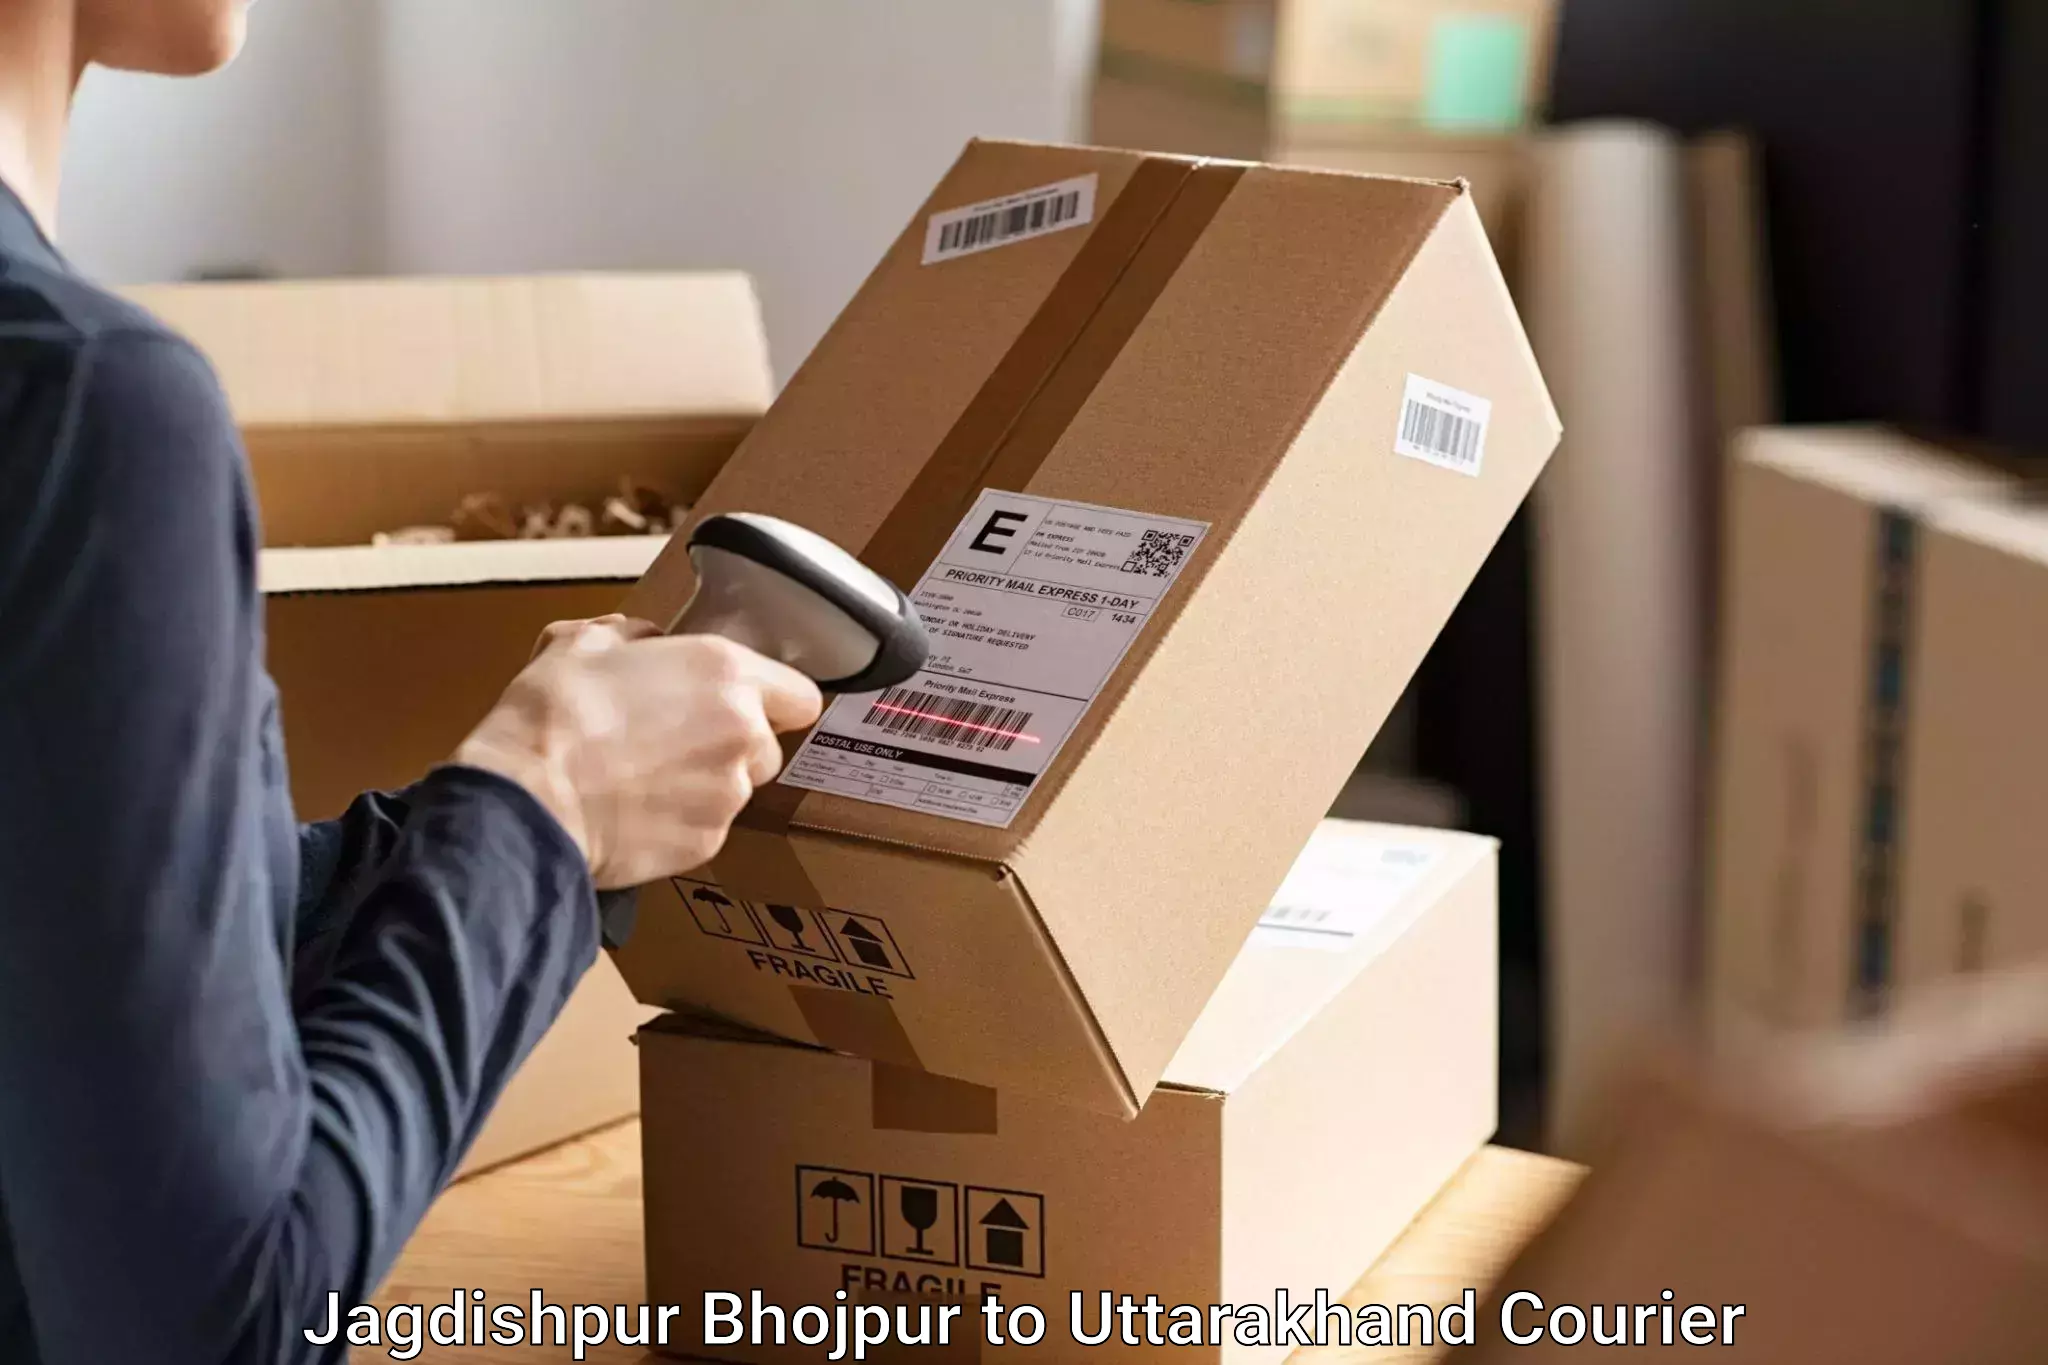 Express luggage delivery Jagdishpur Bhojpur to Rudrapur